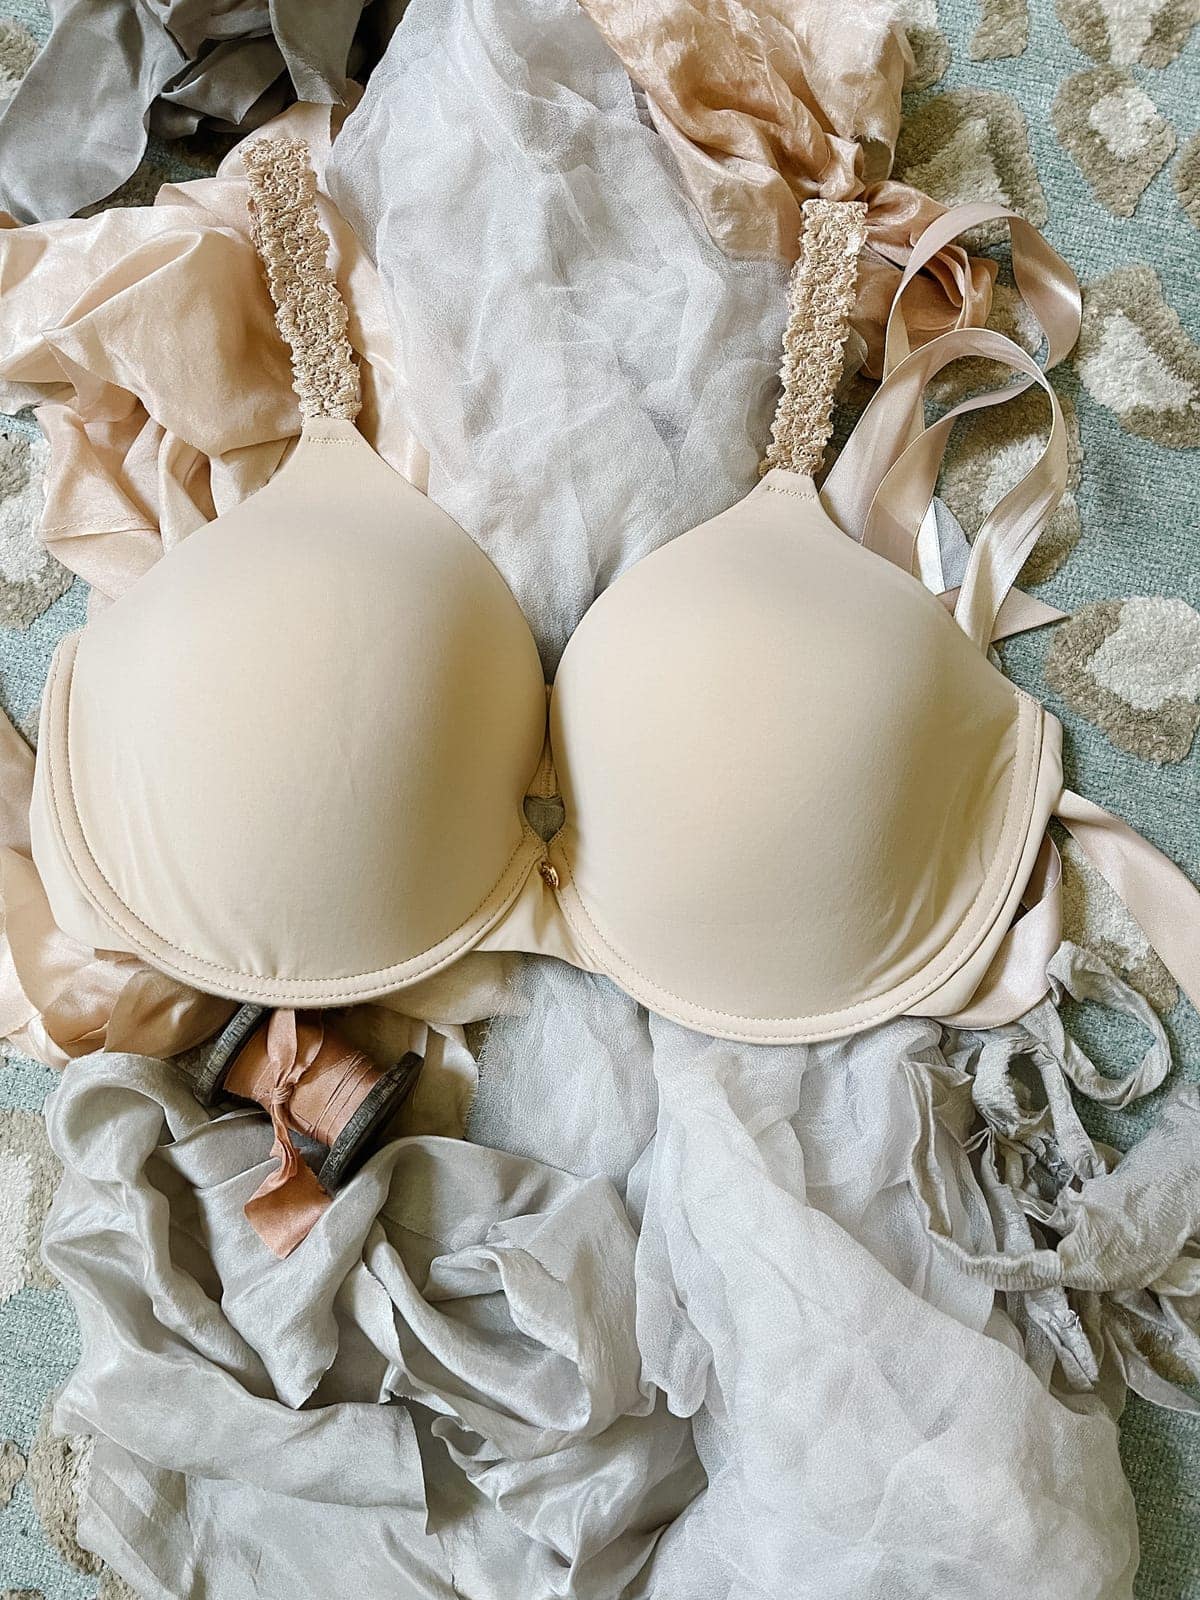 Most Comfortable Bras - Natori Bra Review - Really Into This